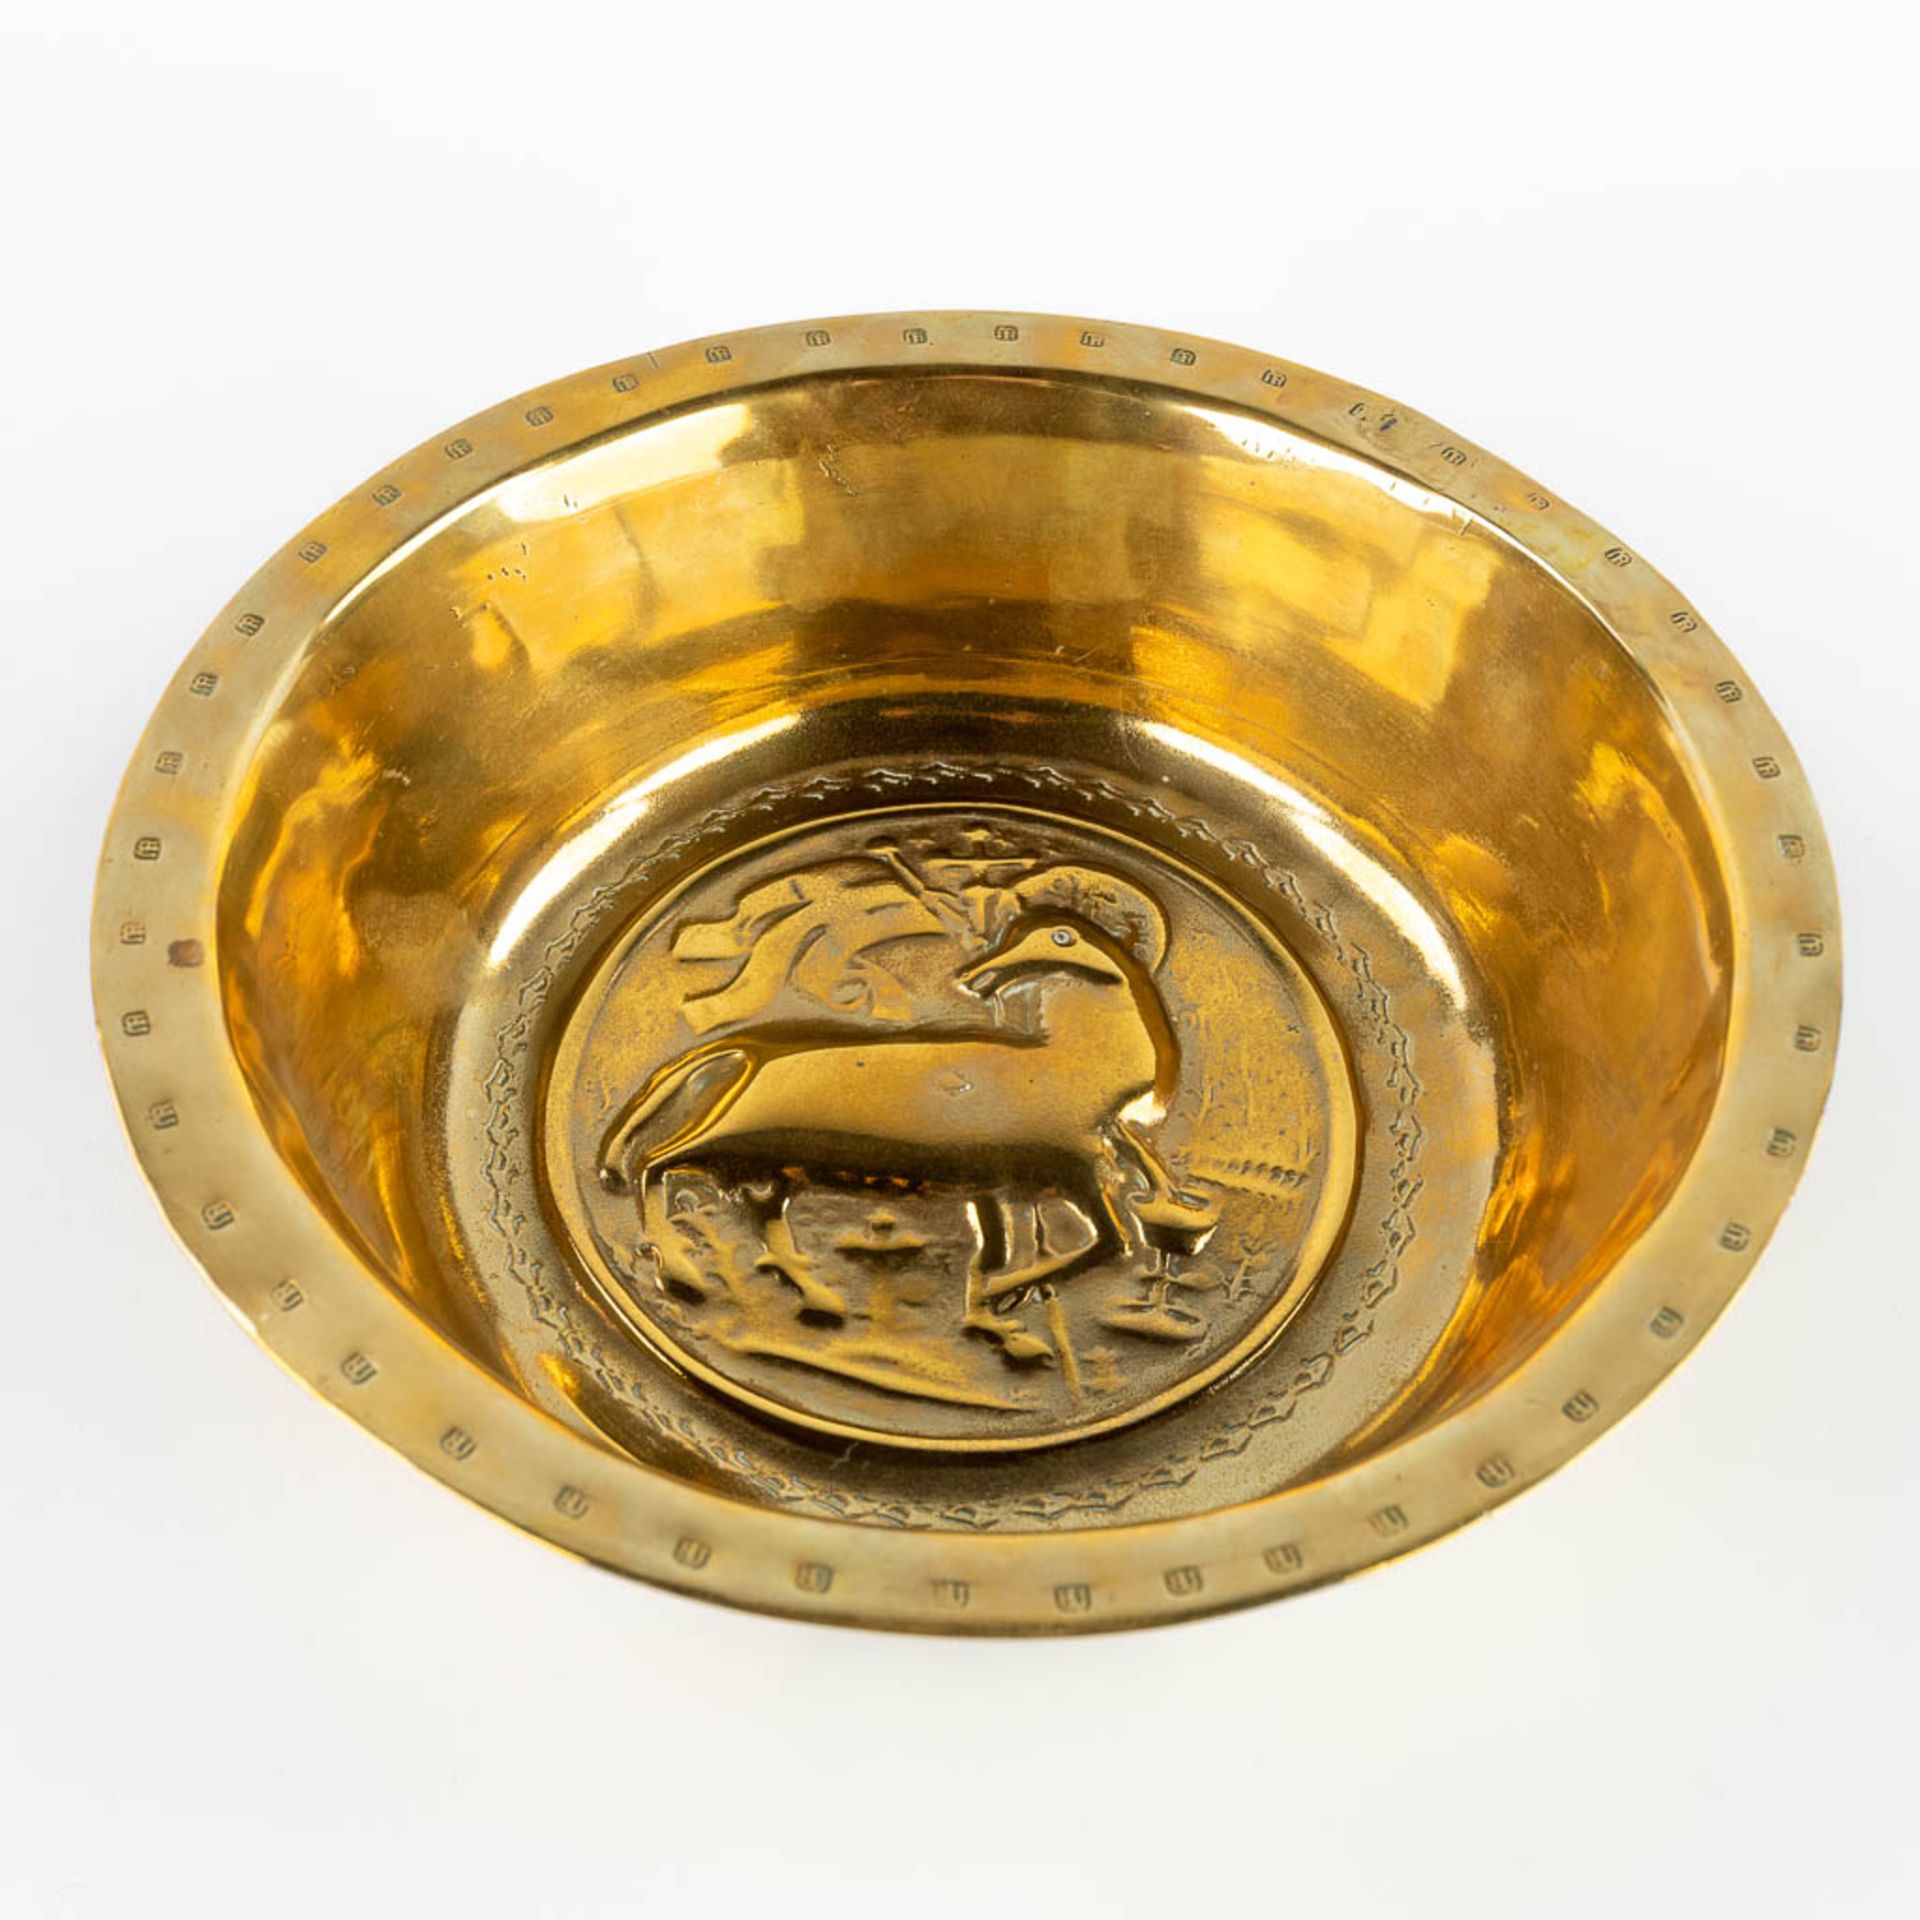 An antique Baptismal Font, copper embossed with an image of the Holy Lamb. 17th C. (H:7,5 x D:26 cm) - Image 3 of 9